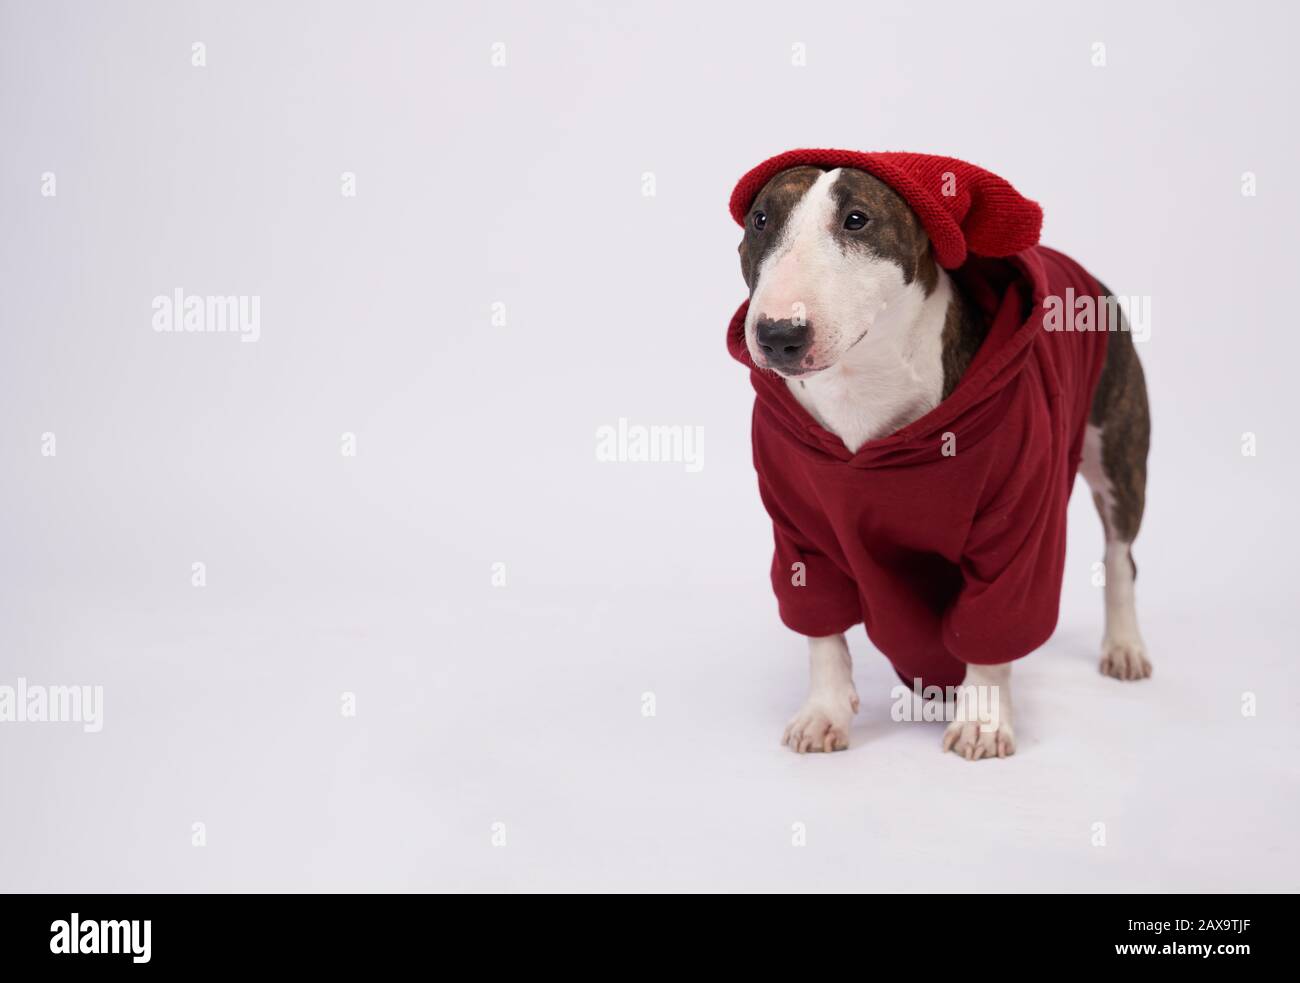 Fashionable dog wears red hoodie, bull Terrier Stock Photo